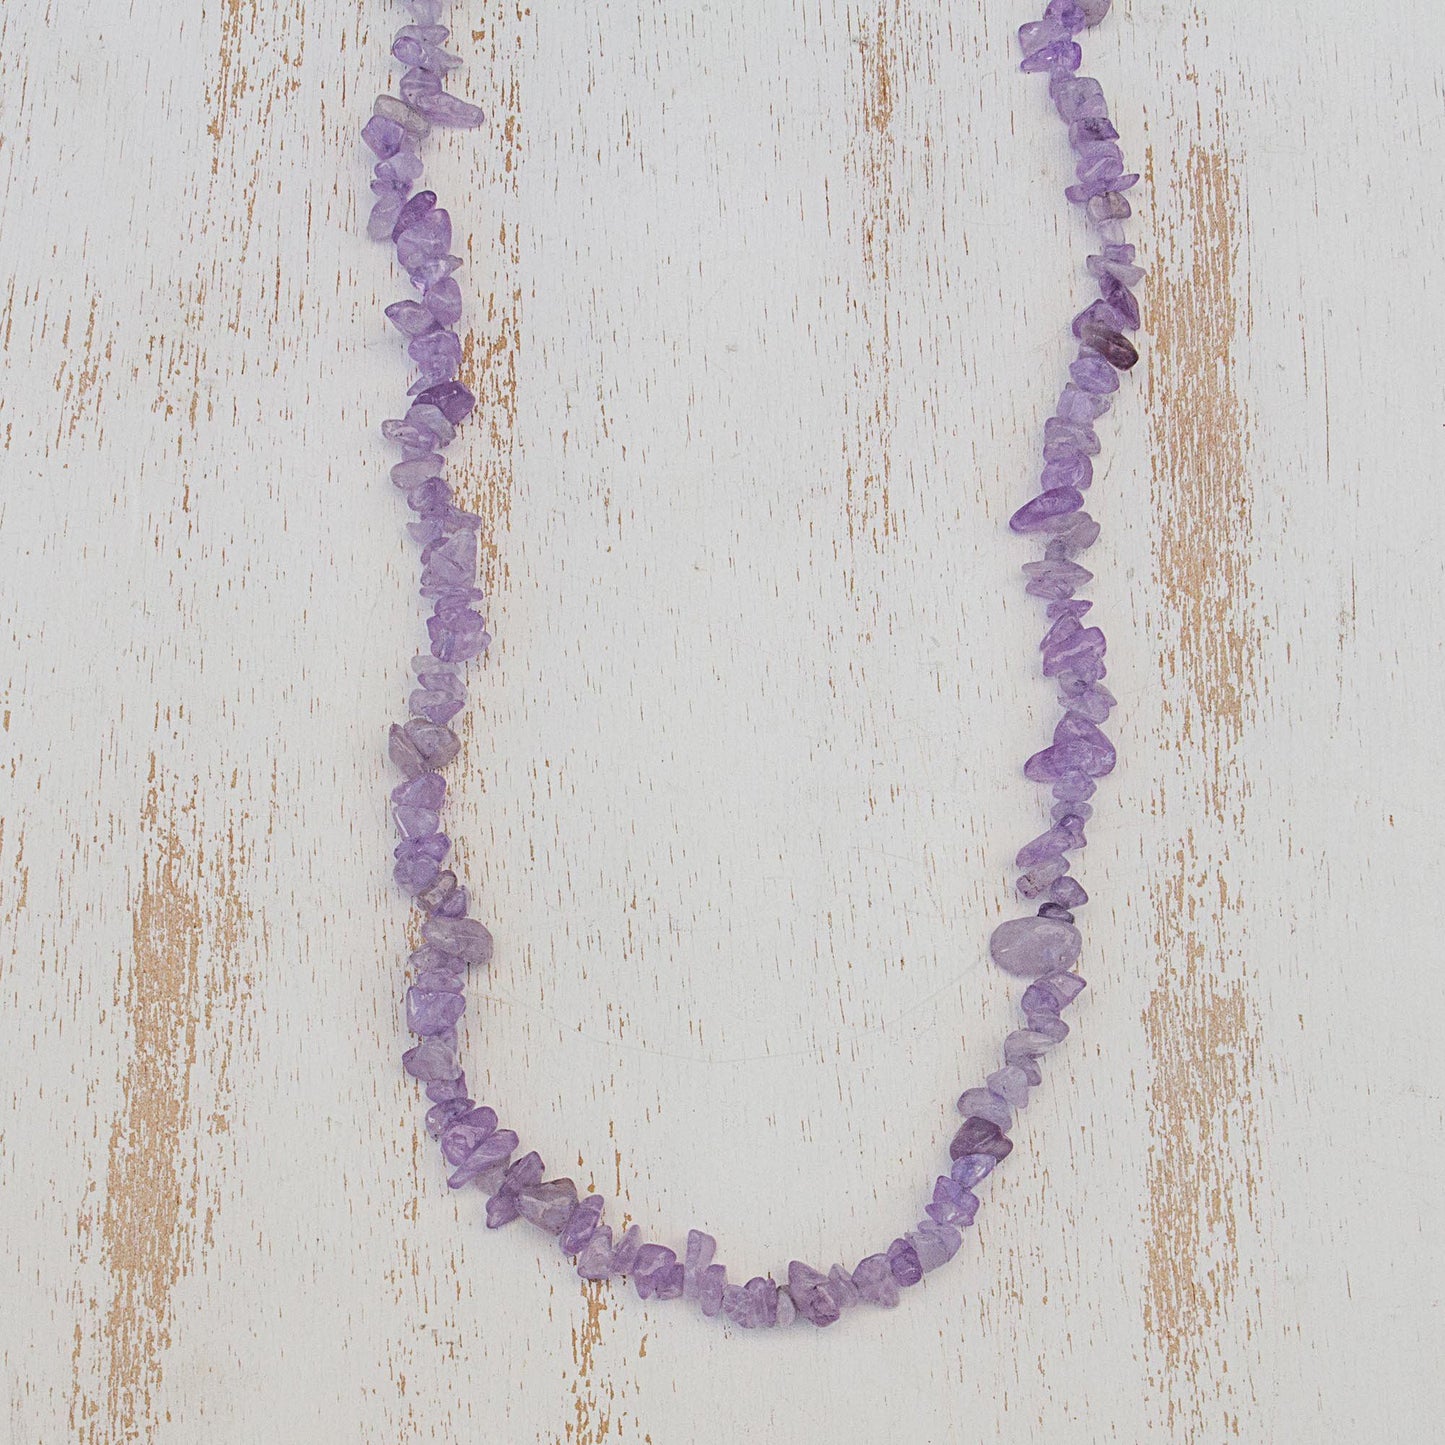 Lilac and Lavender Multi-Gem Amethyst Necklace